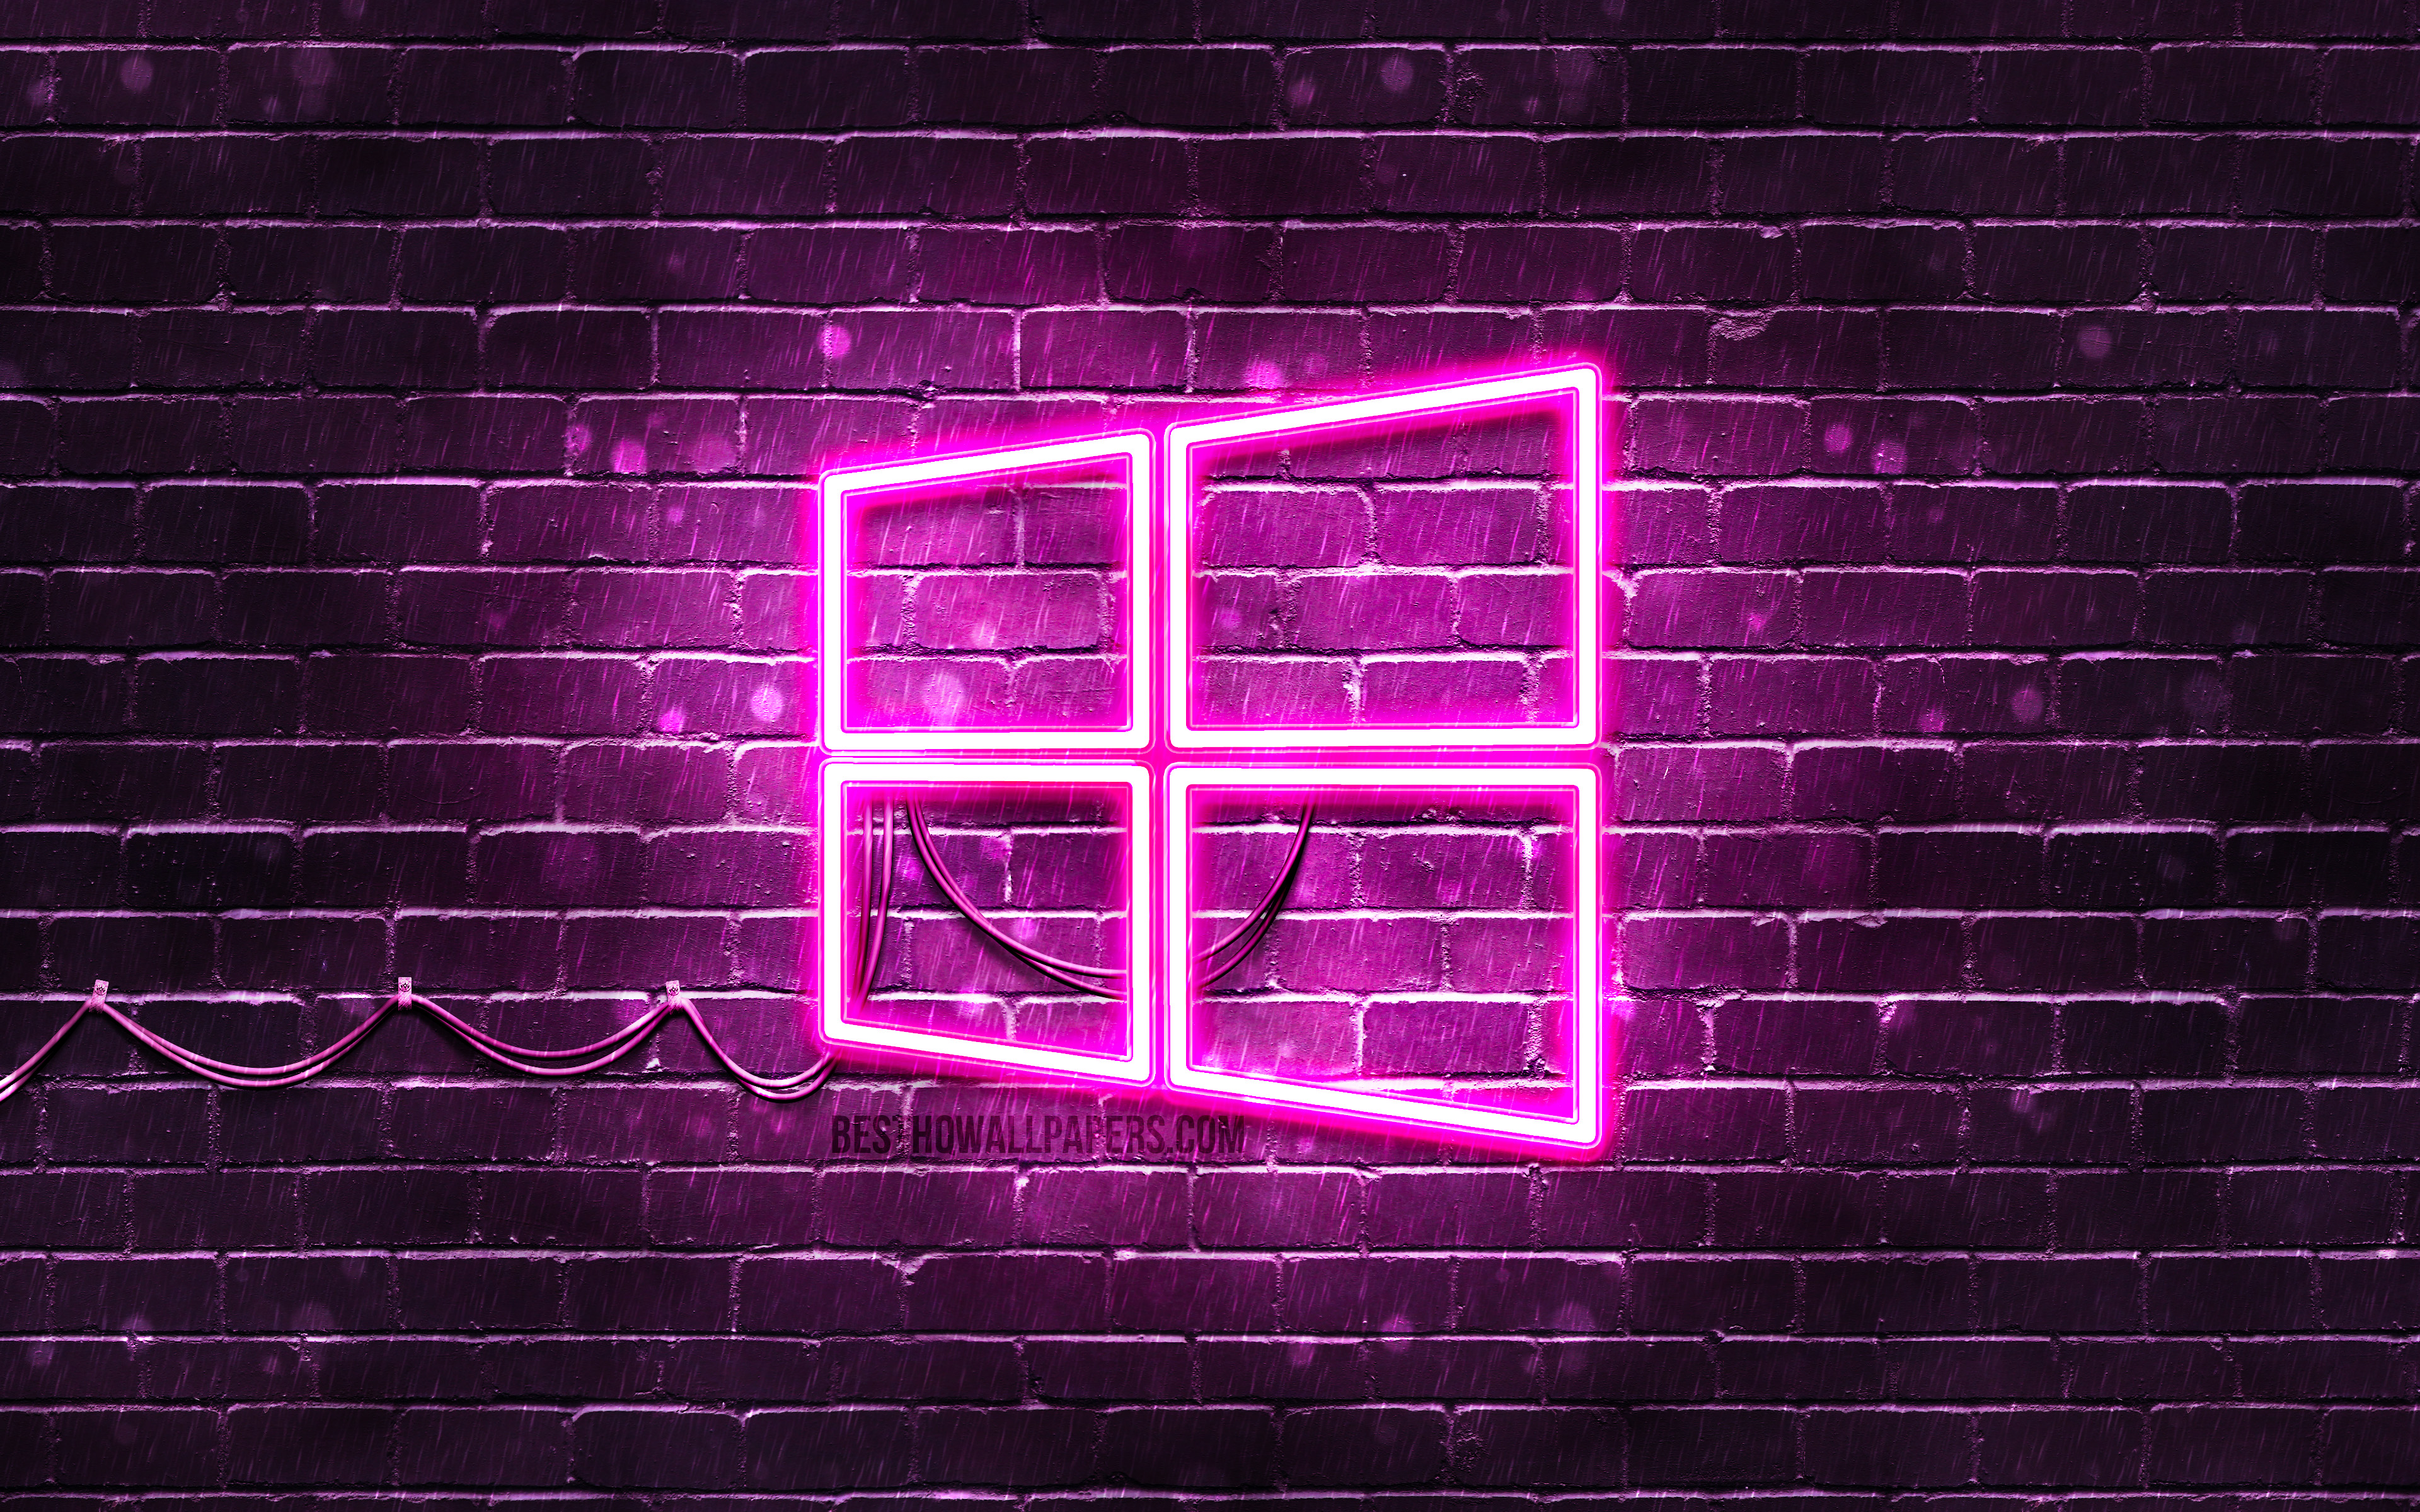 Download wallpaper Windows 10 purple logo, 4k, purple brickwall, Windows 10 logo, brands, Windows 10 neon logo, Windows 10 for desktop with resolution 3840x2400. High Quality HD picture wallpaper